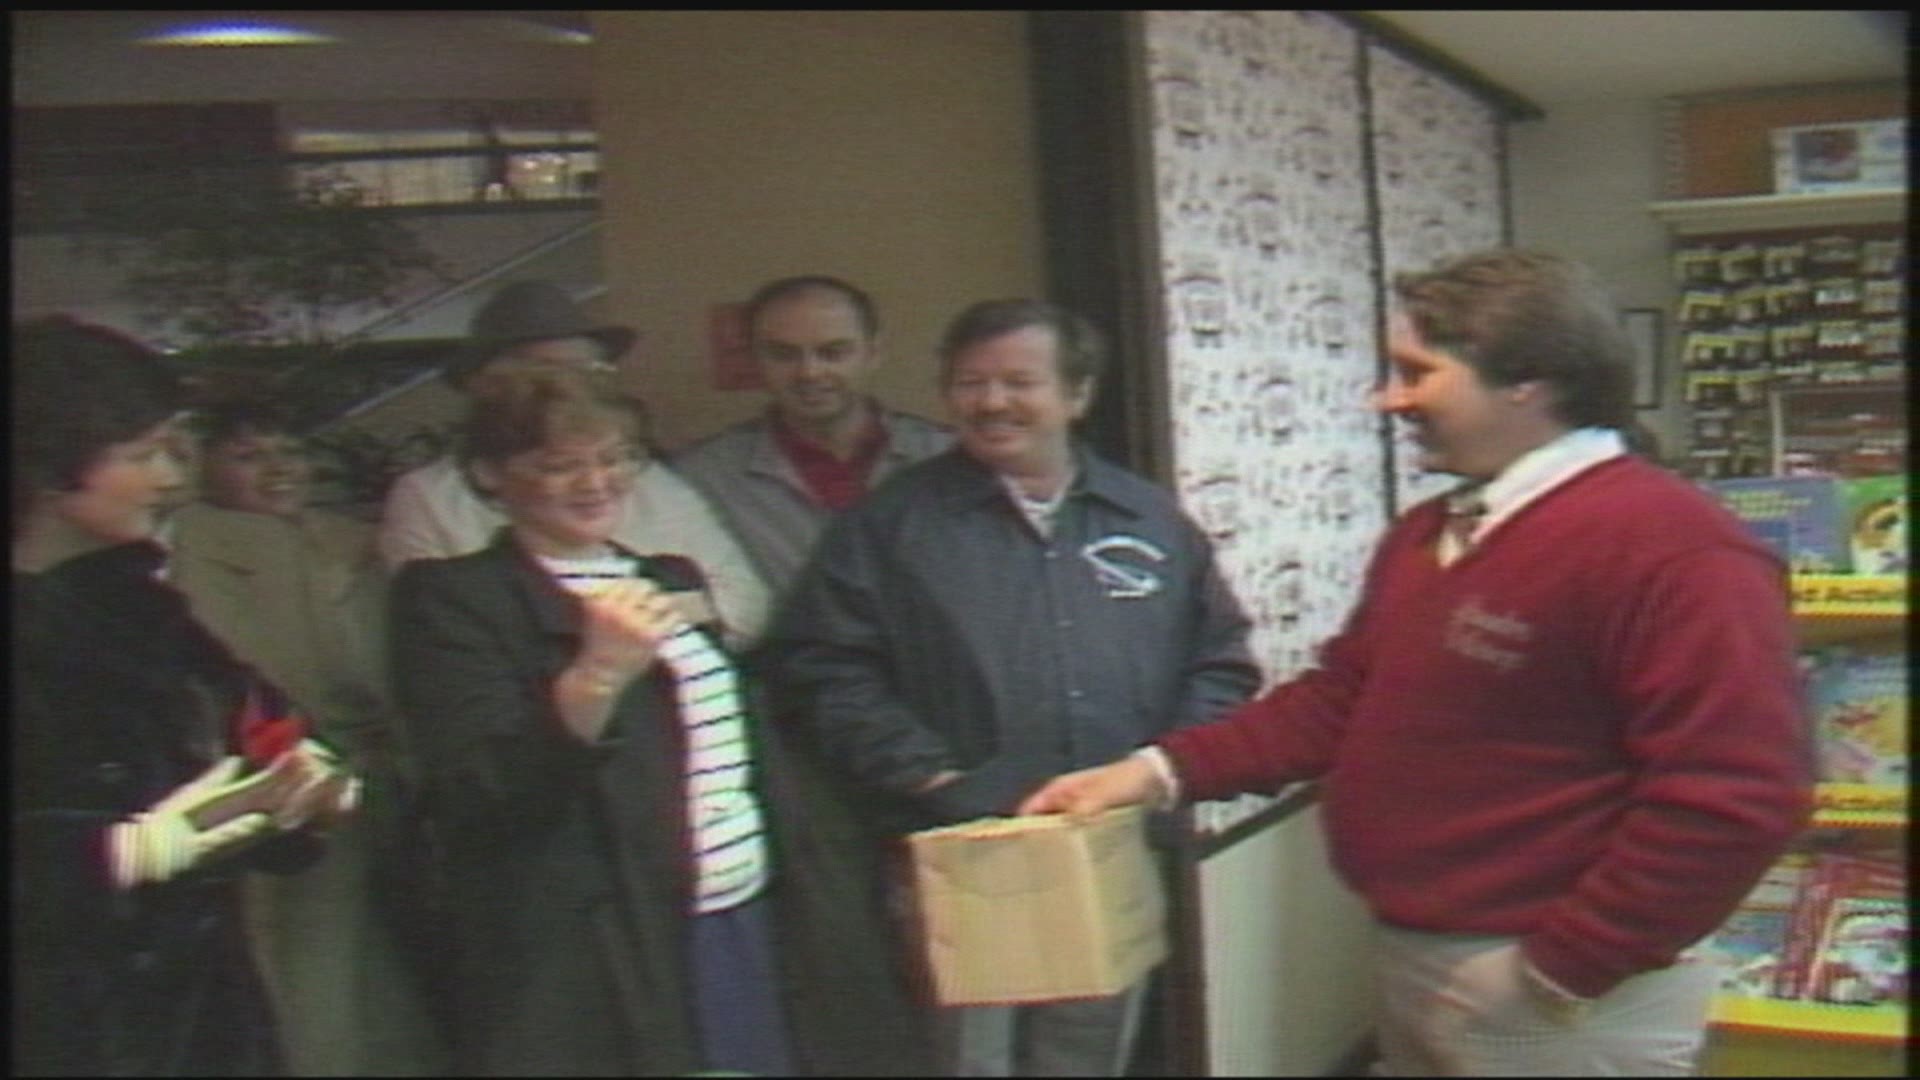 Here's 13WMAZ video shot during the 1980's at Macon Mall. It includes the Cabbage Patch craze at one of the toy stores.